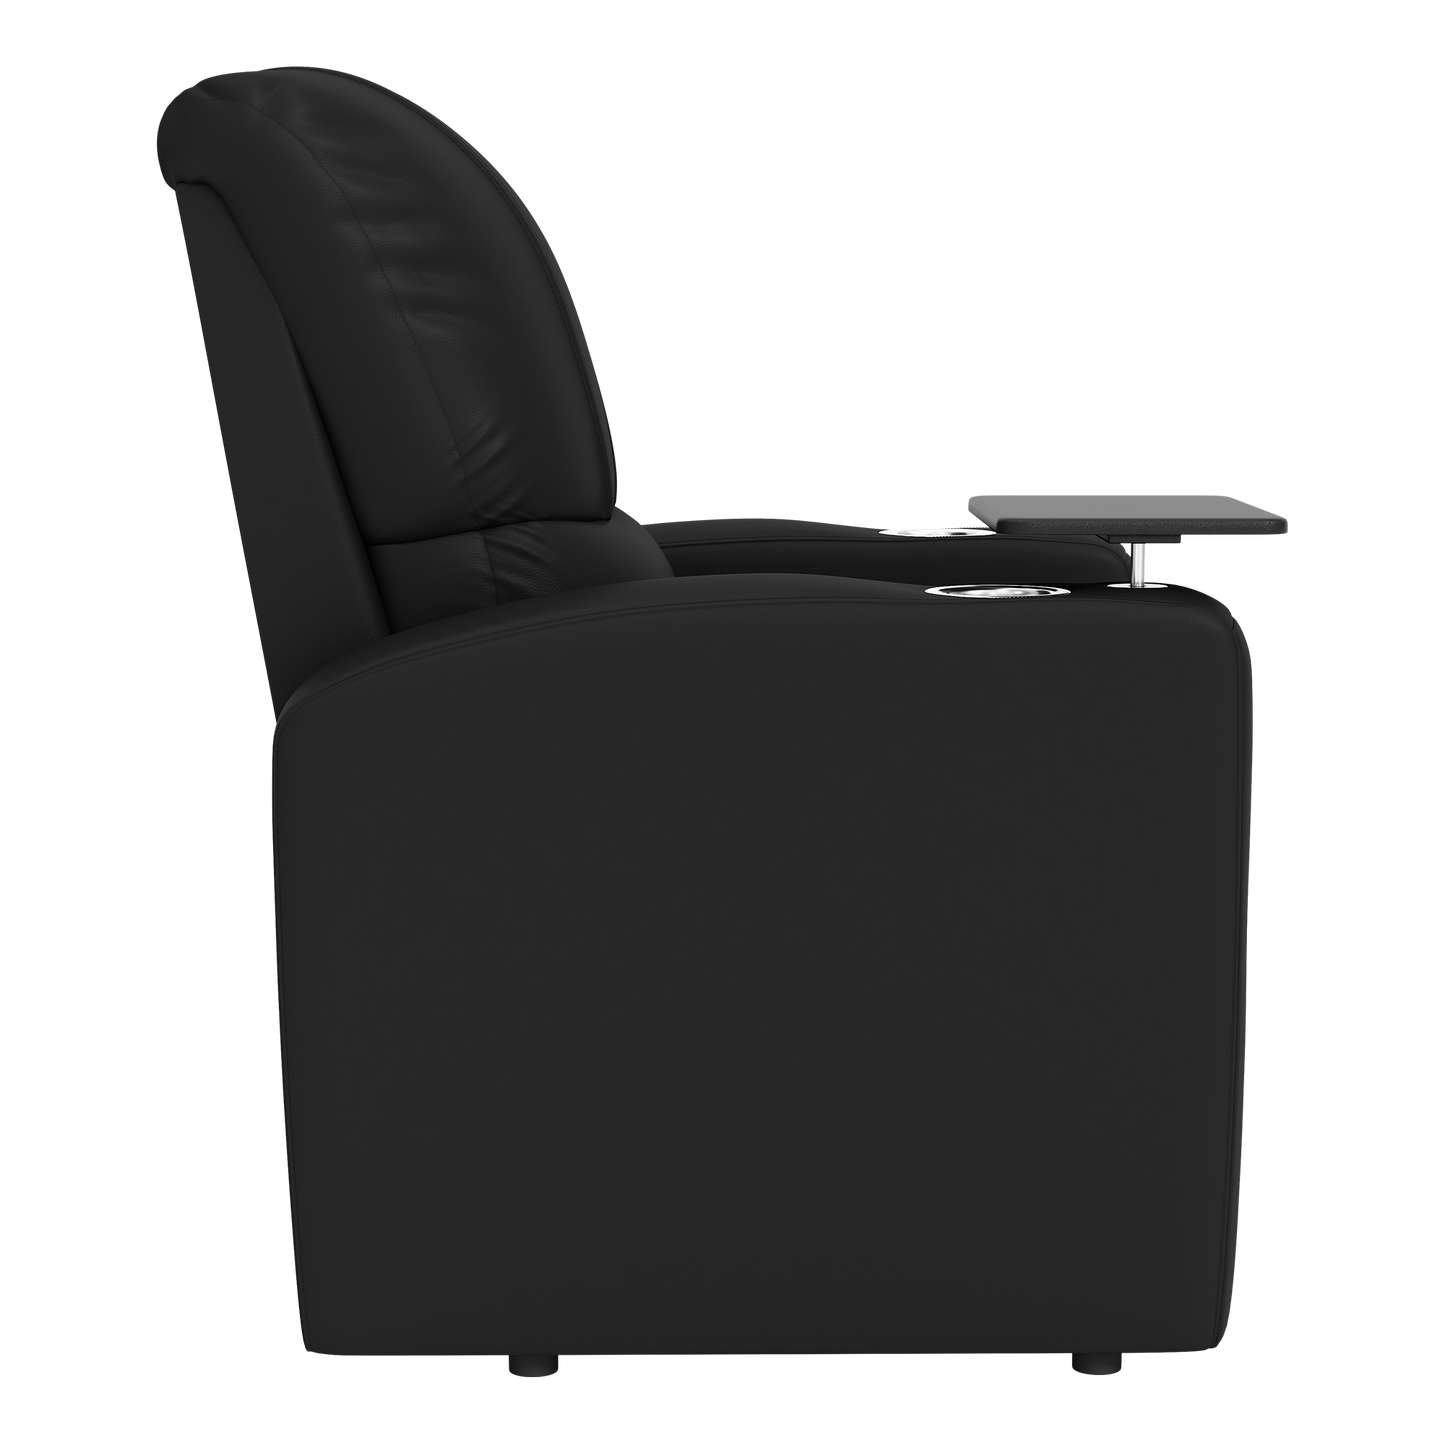 Stealth Power Plus Recliner with Tennessee Titans Secondary Logo